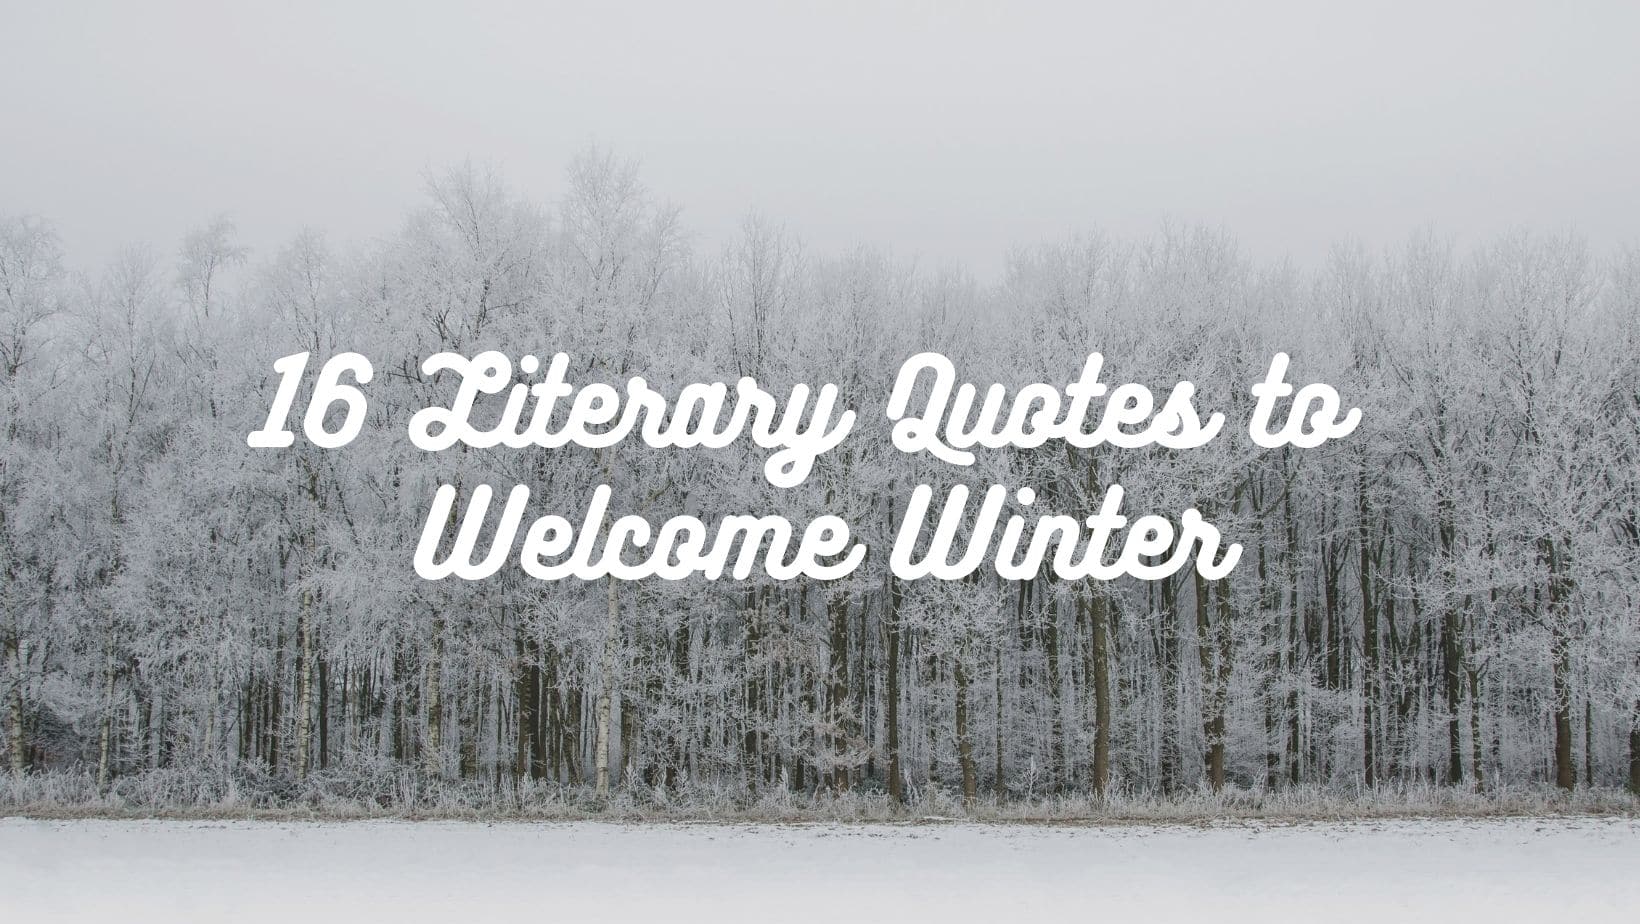 60 Best Winter Quotes - Inspirational Sayings About Winter